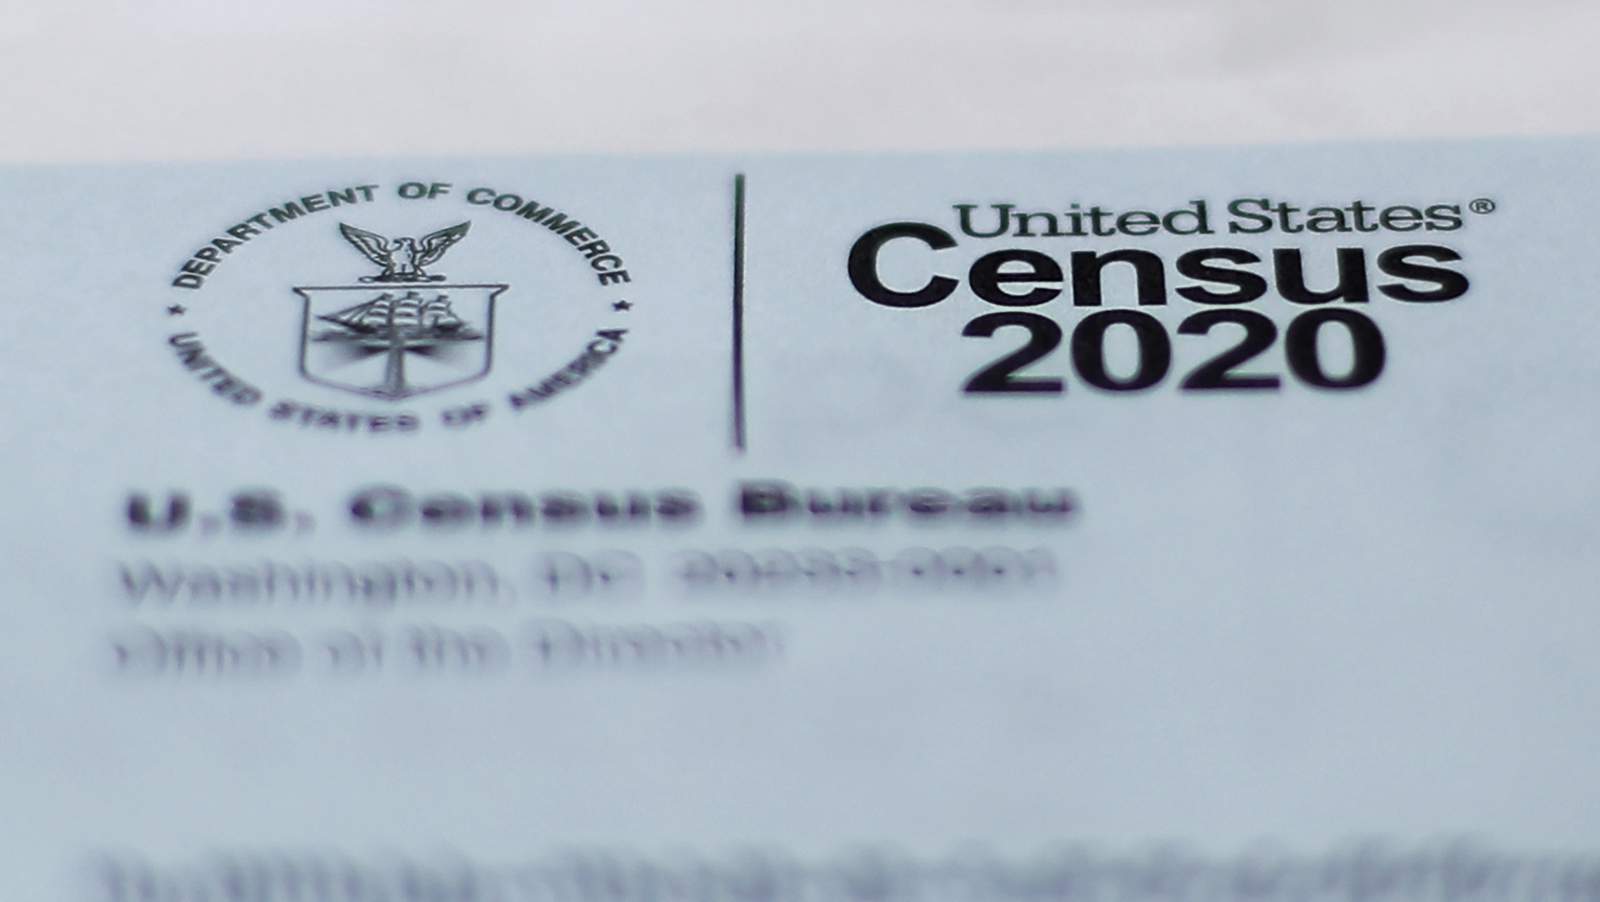 US Census will send emails to low-responding areas: Here’s what to know